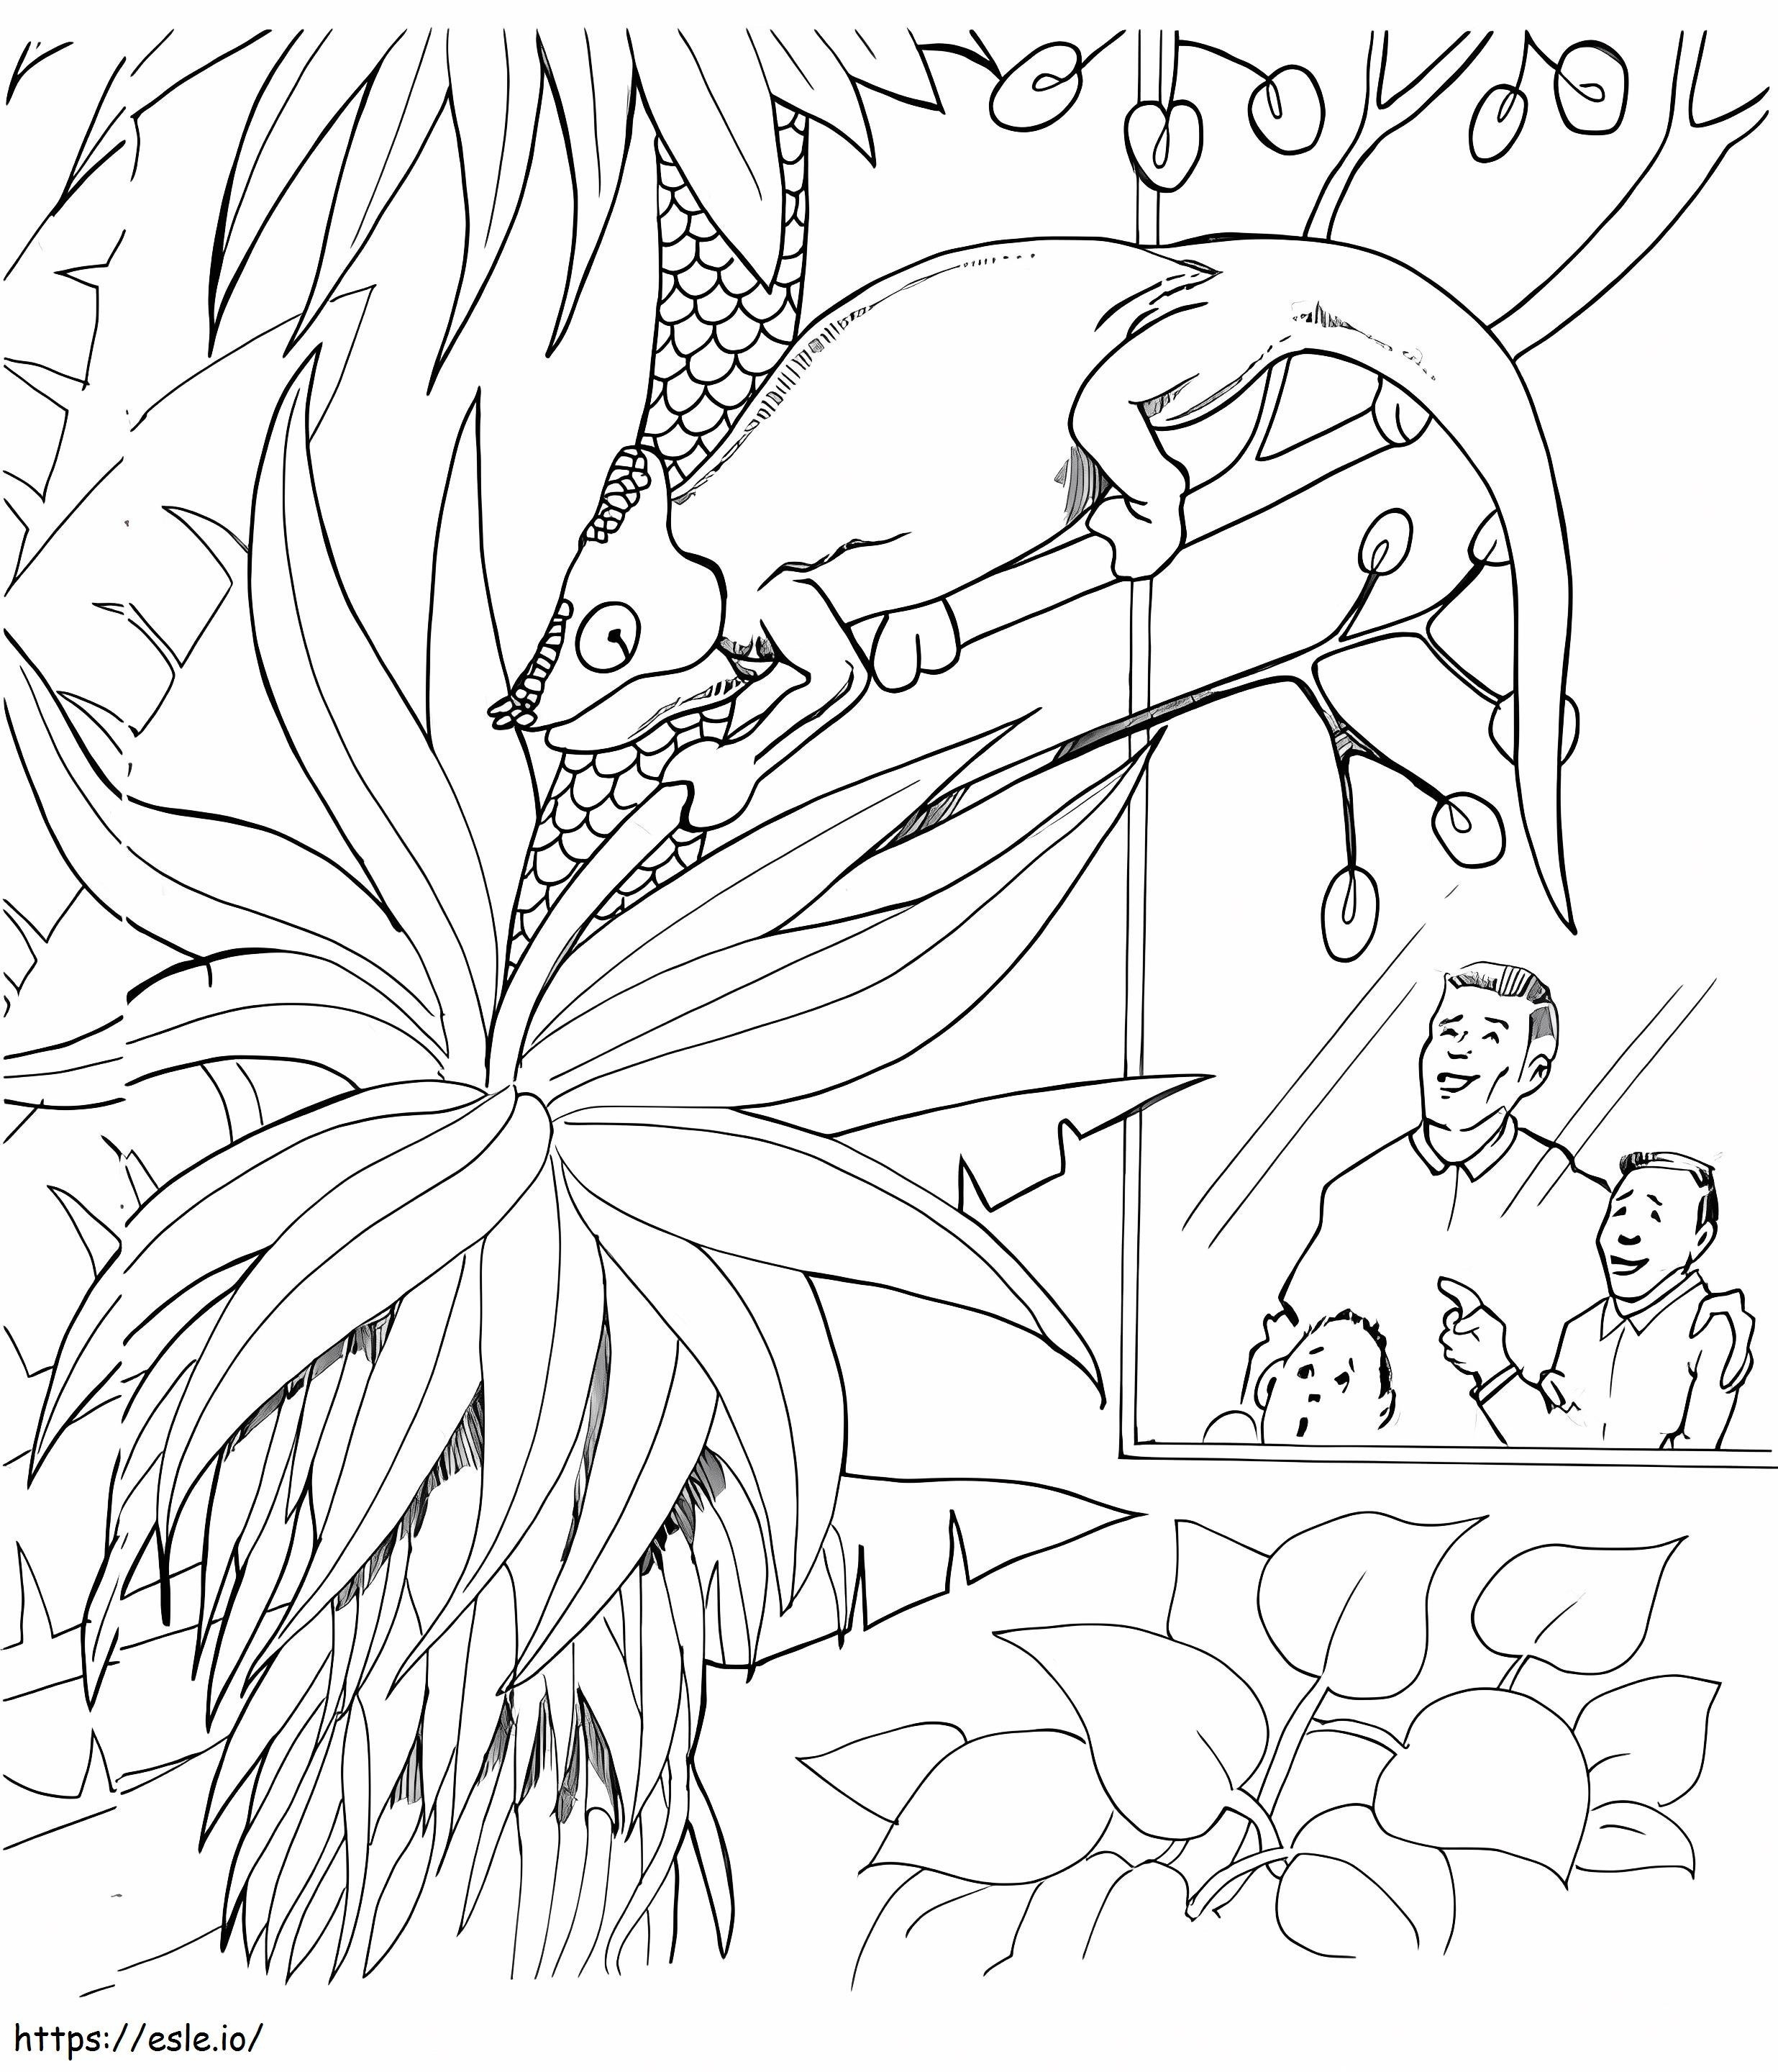 Chameleon In Zoo coloring page